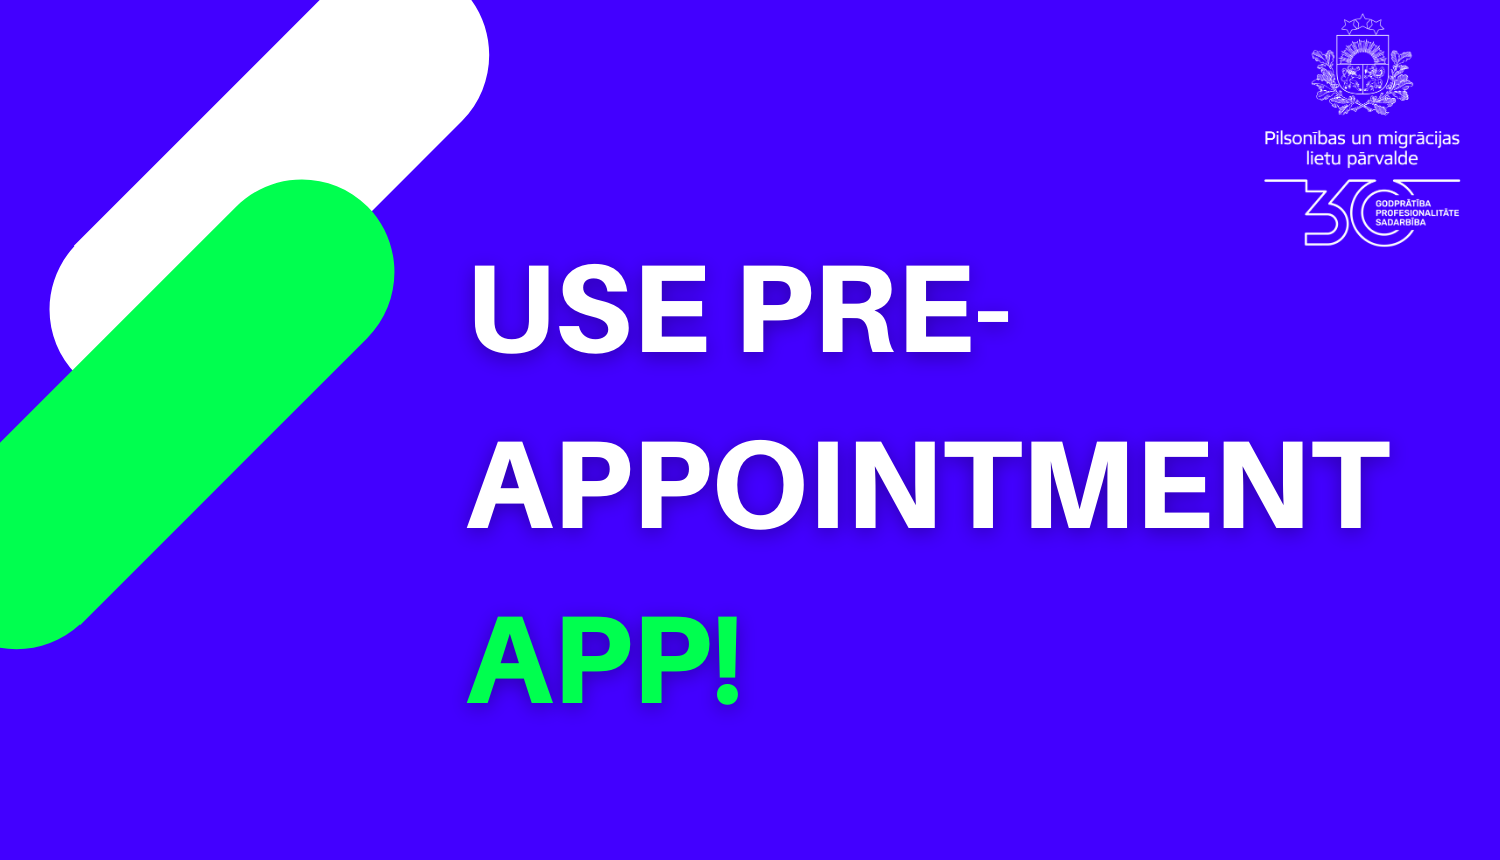 Text on bright blue bacjground: "Use pre-appointment app!"